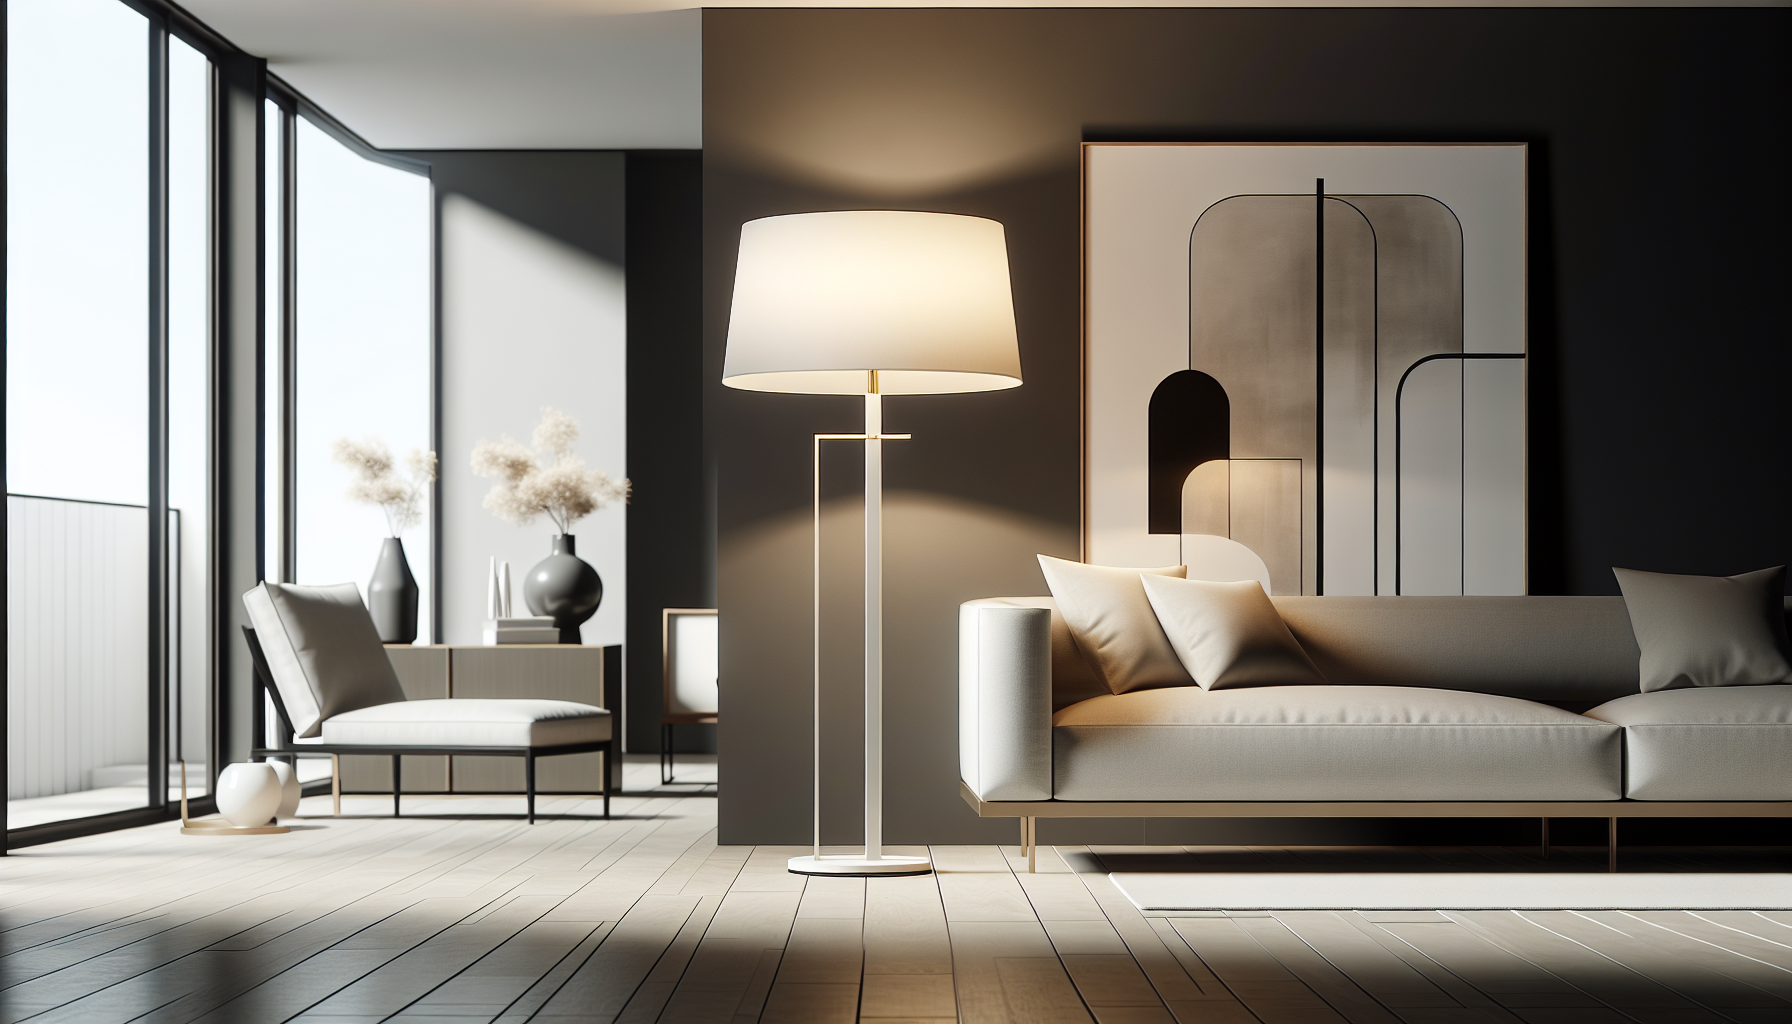 Sleek and modern floor lamp in a contemporary setting